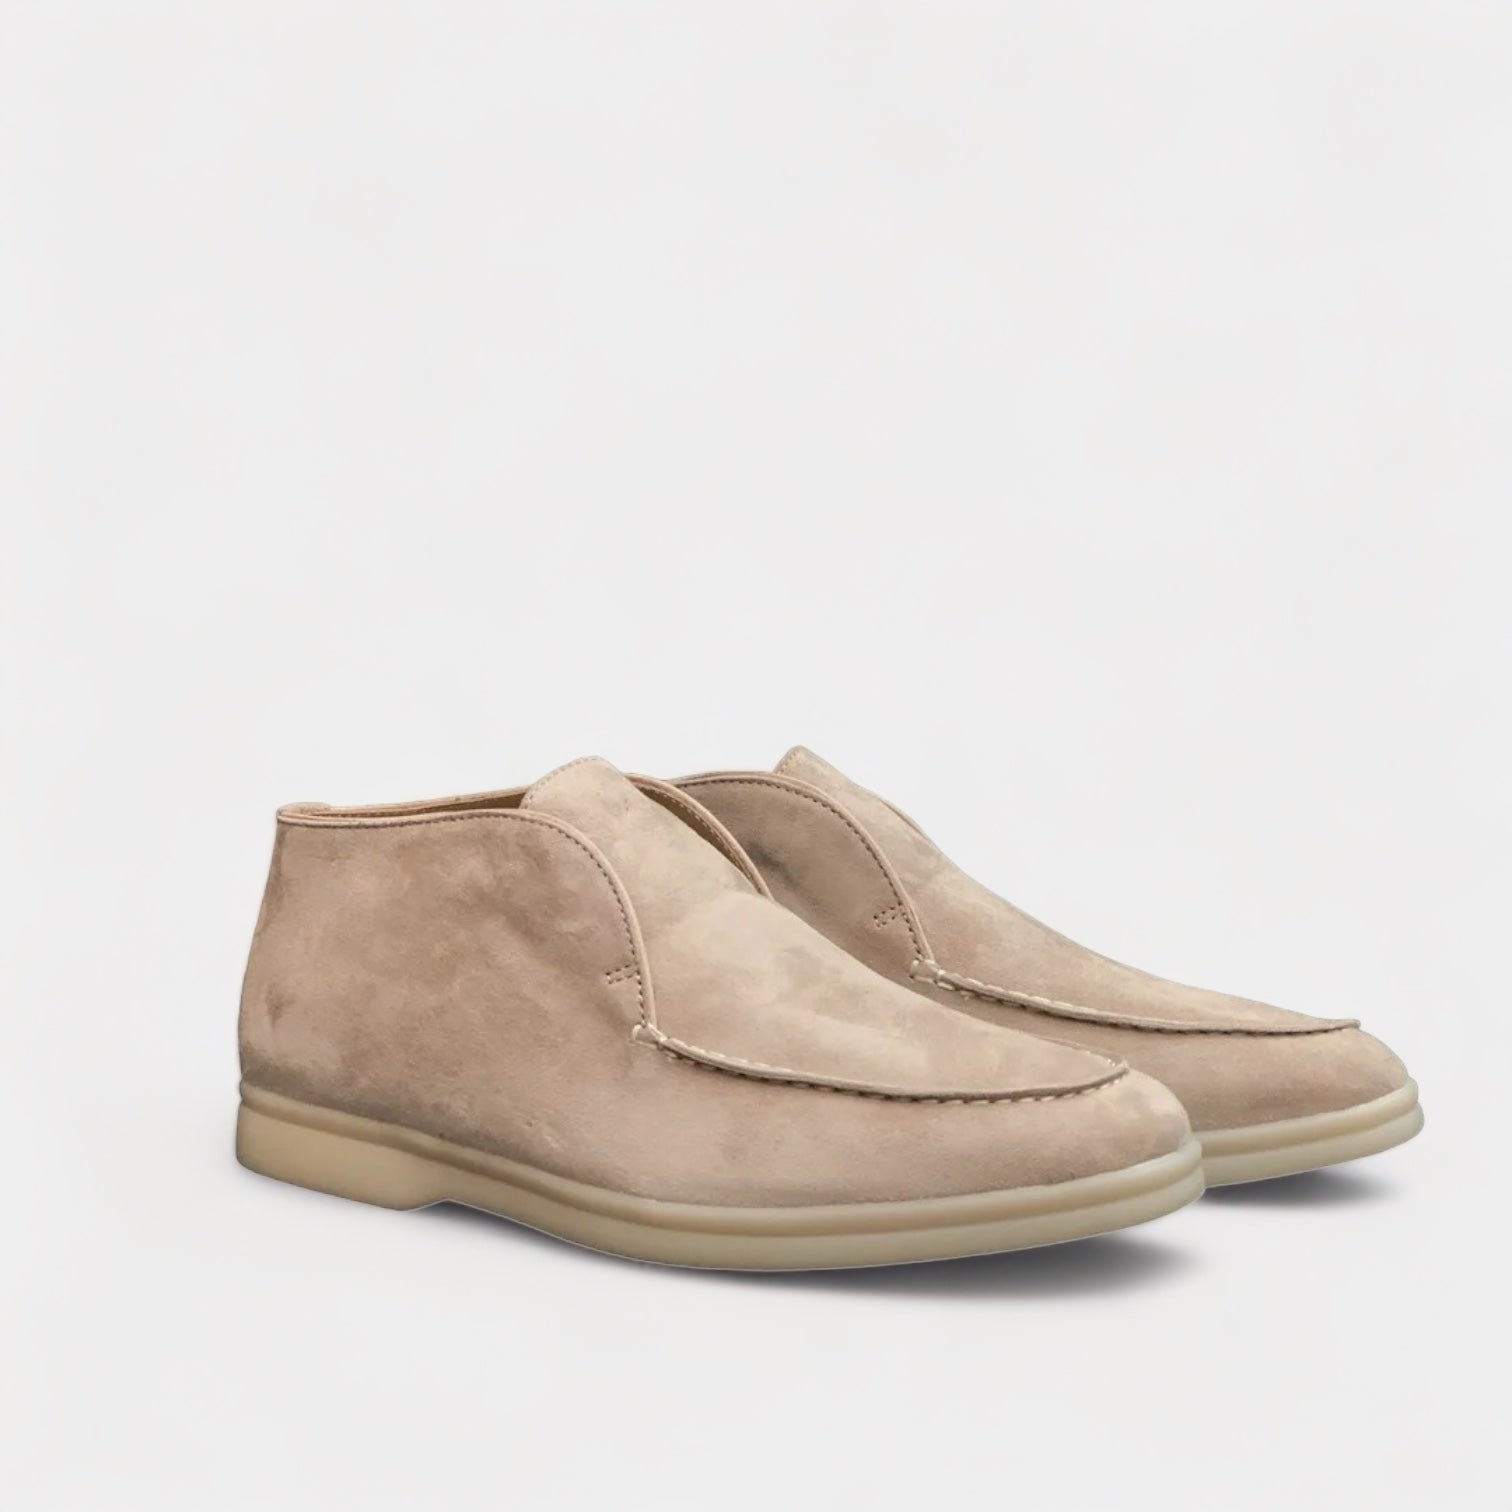 OLD MONEY Suede Shoes - WEAR OLD MONEY